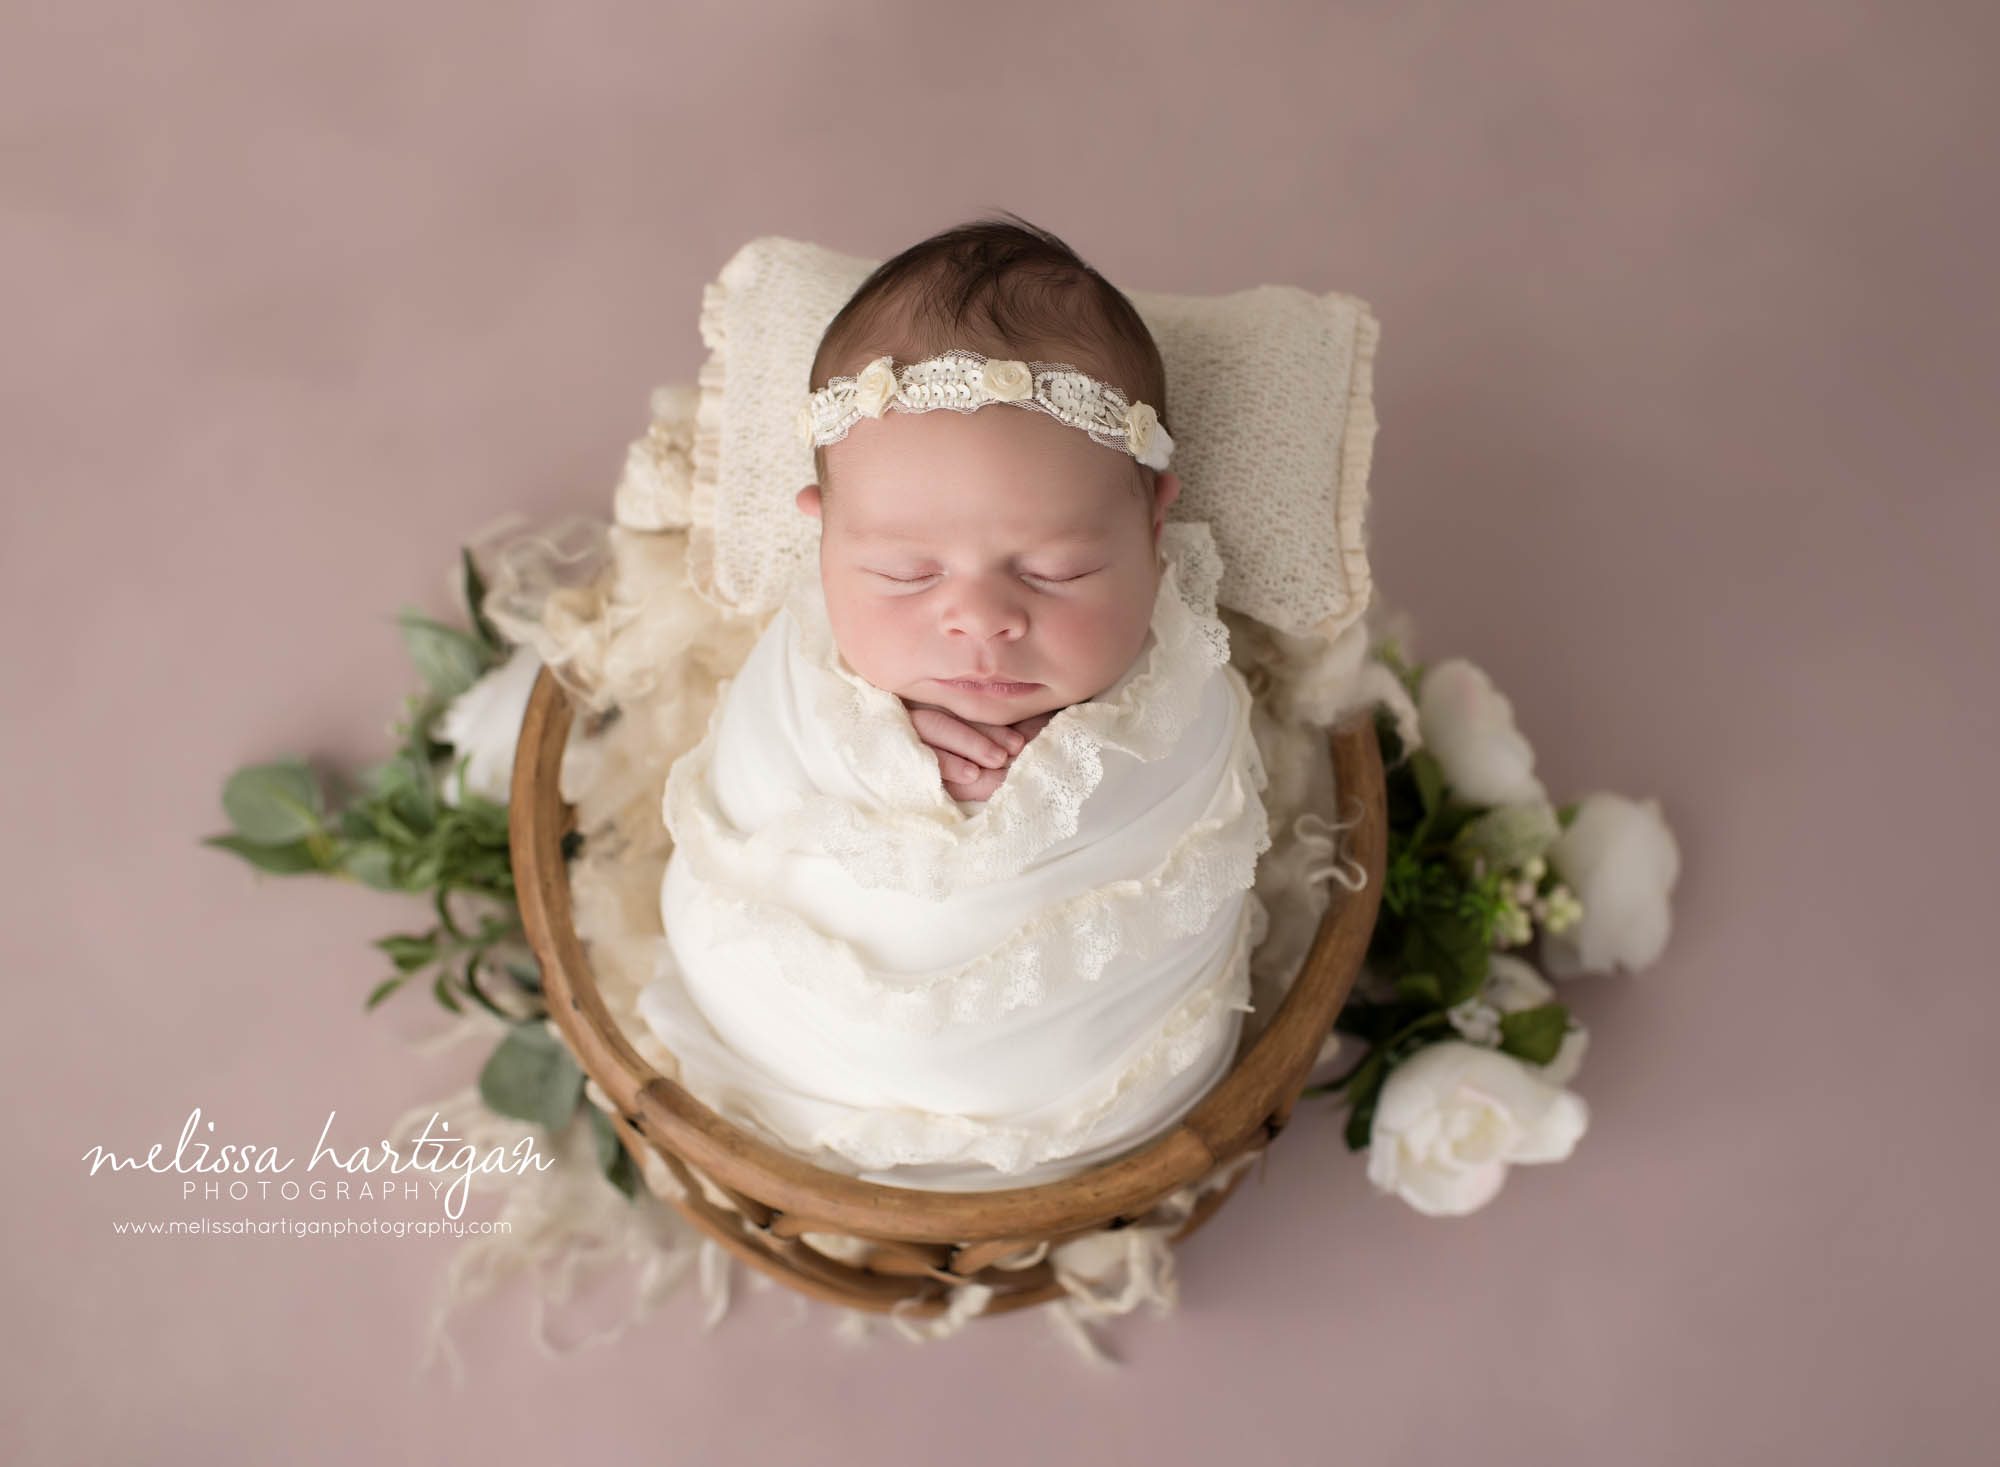 newborn baby girl wrapped in cream wrap with matching headband posed in basket with cream flowers hartford county newborn photography